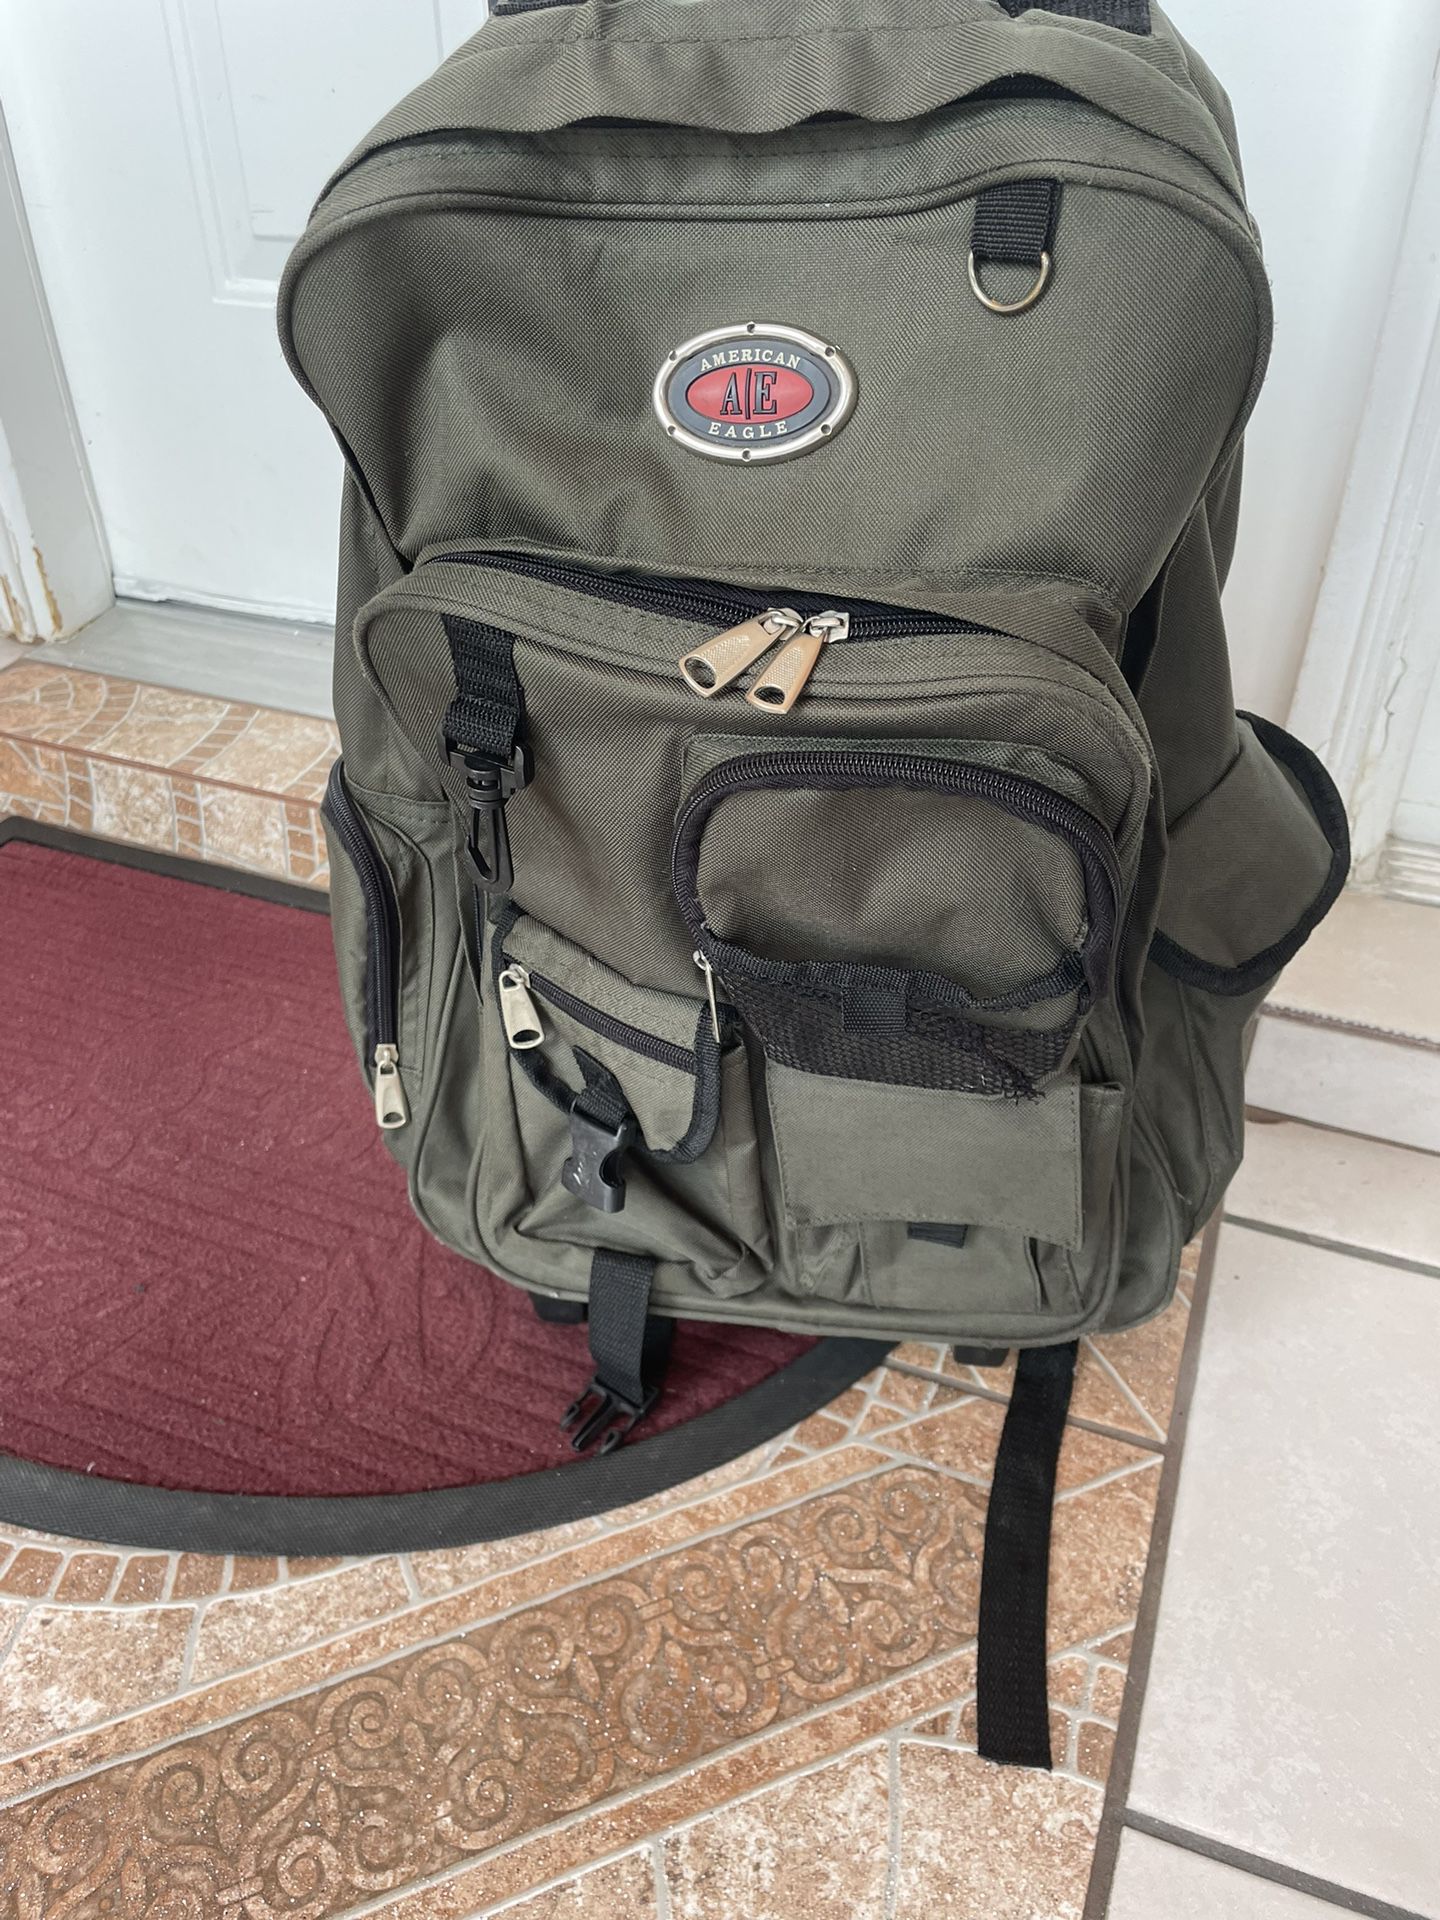 hand backpack in good condition with very clean wheel